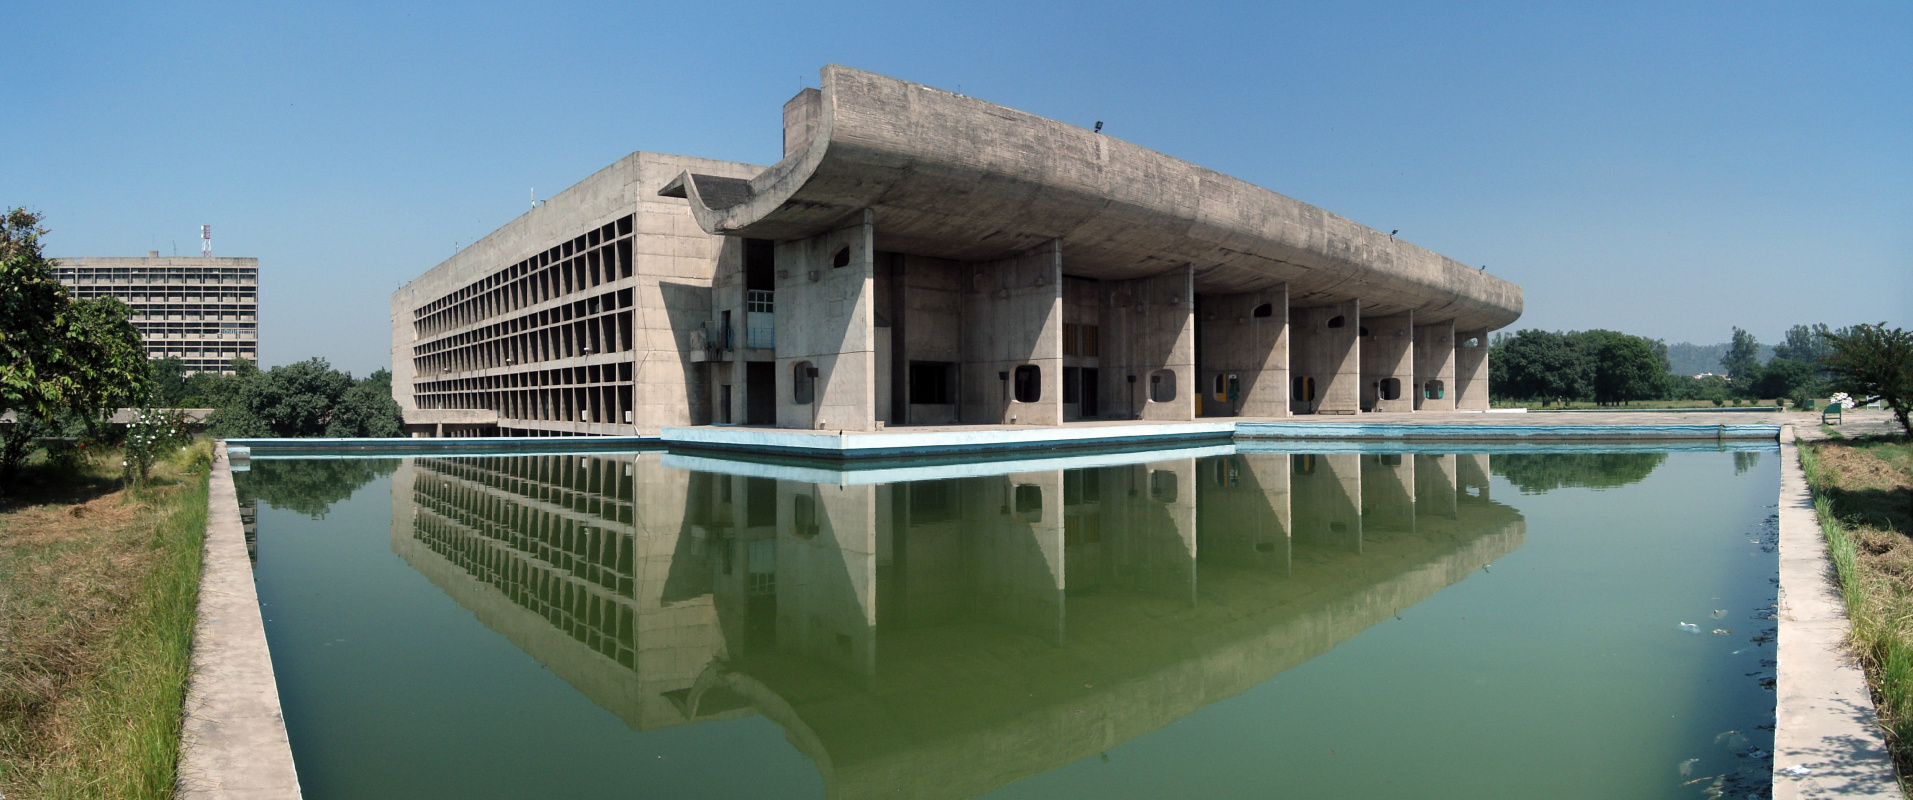 Chandigarh City, 1951 by Le Corbusier: History, Analysis & Facts ...